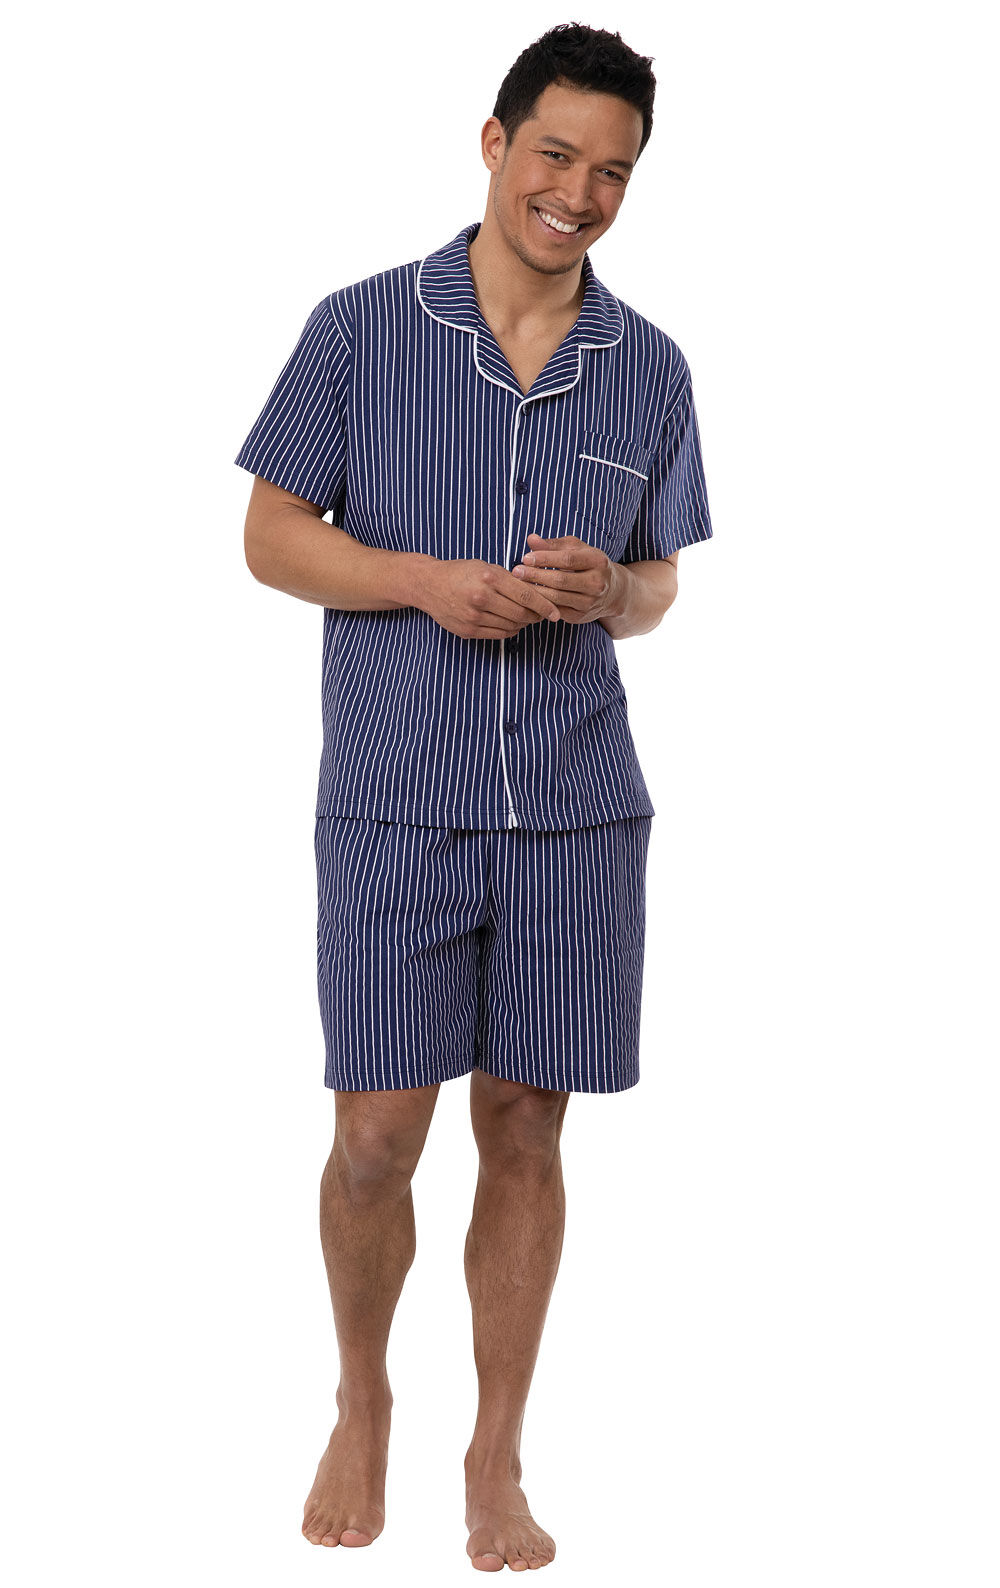 Fully Opening Front Men's Satin Stripe Cotton Nightshirt sizes avail. 